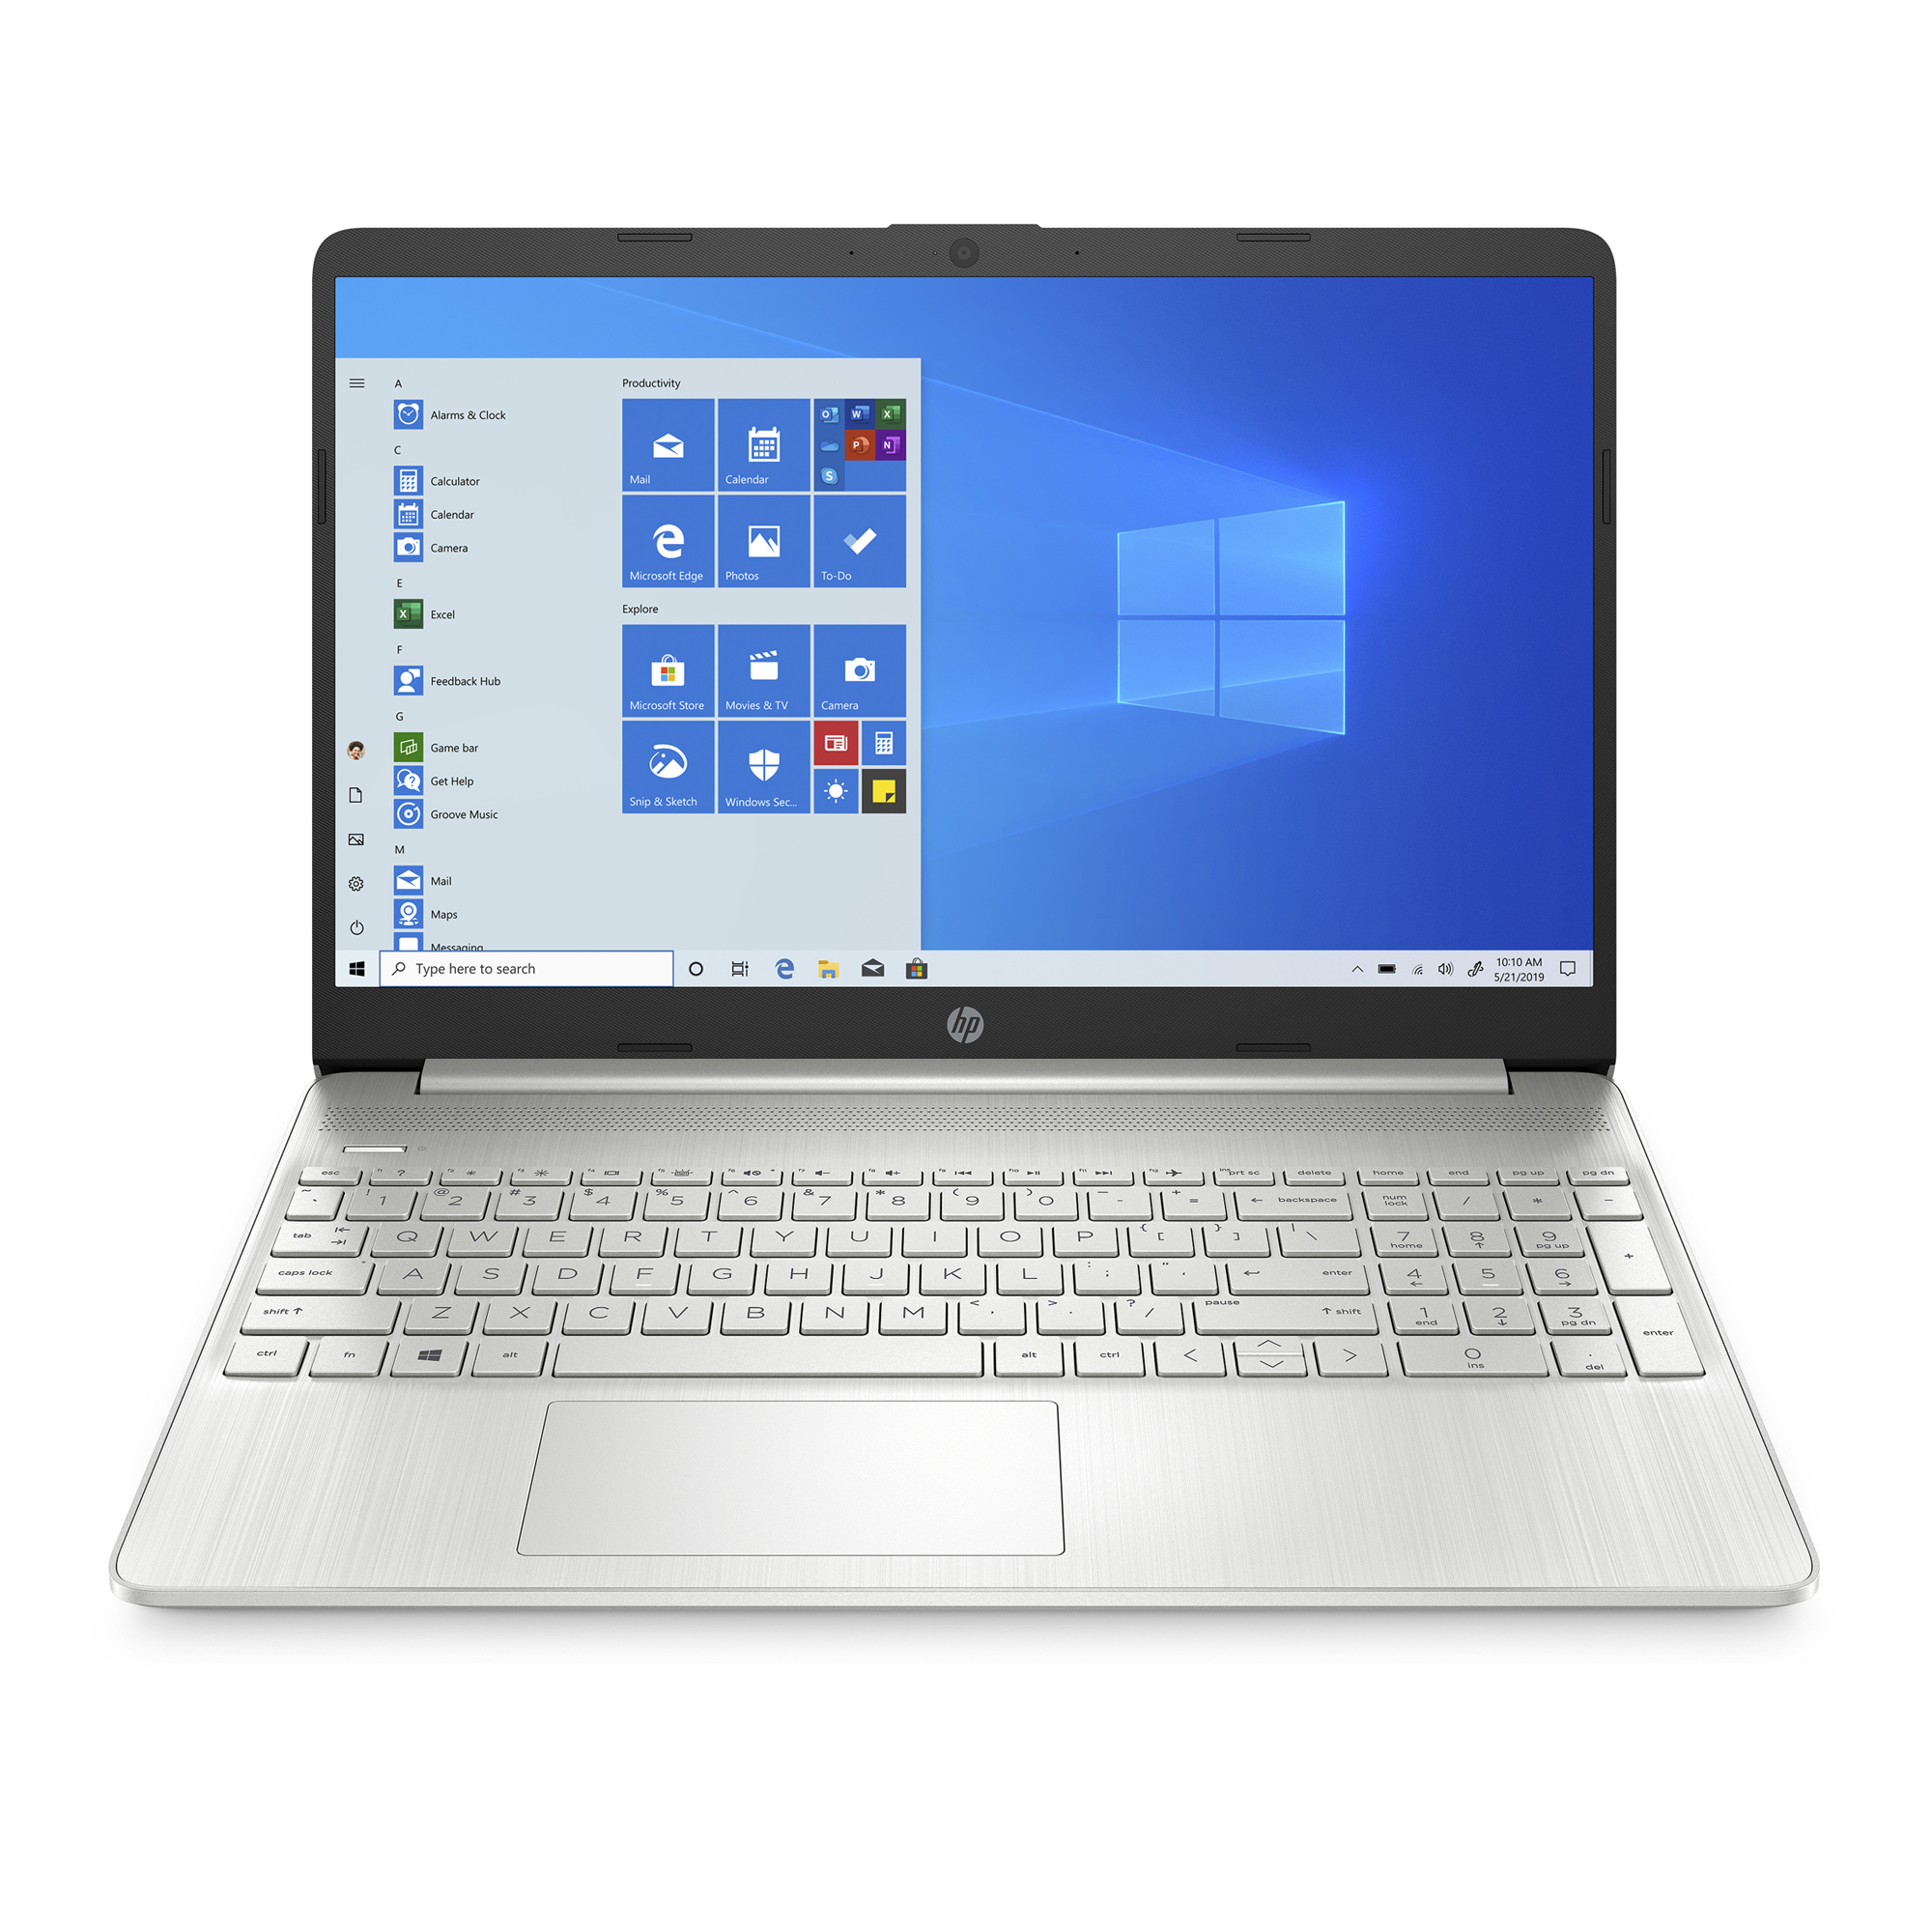 HP 15-EF1010NR 15.6" Notebook with AMD Athlon Gold 3150U 4GB DDR4 128GB SSD Windows 10 Home in S mode Laptop - image 1 of 3